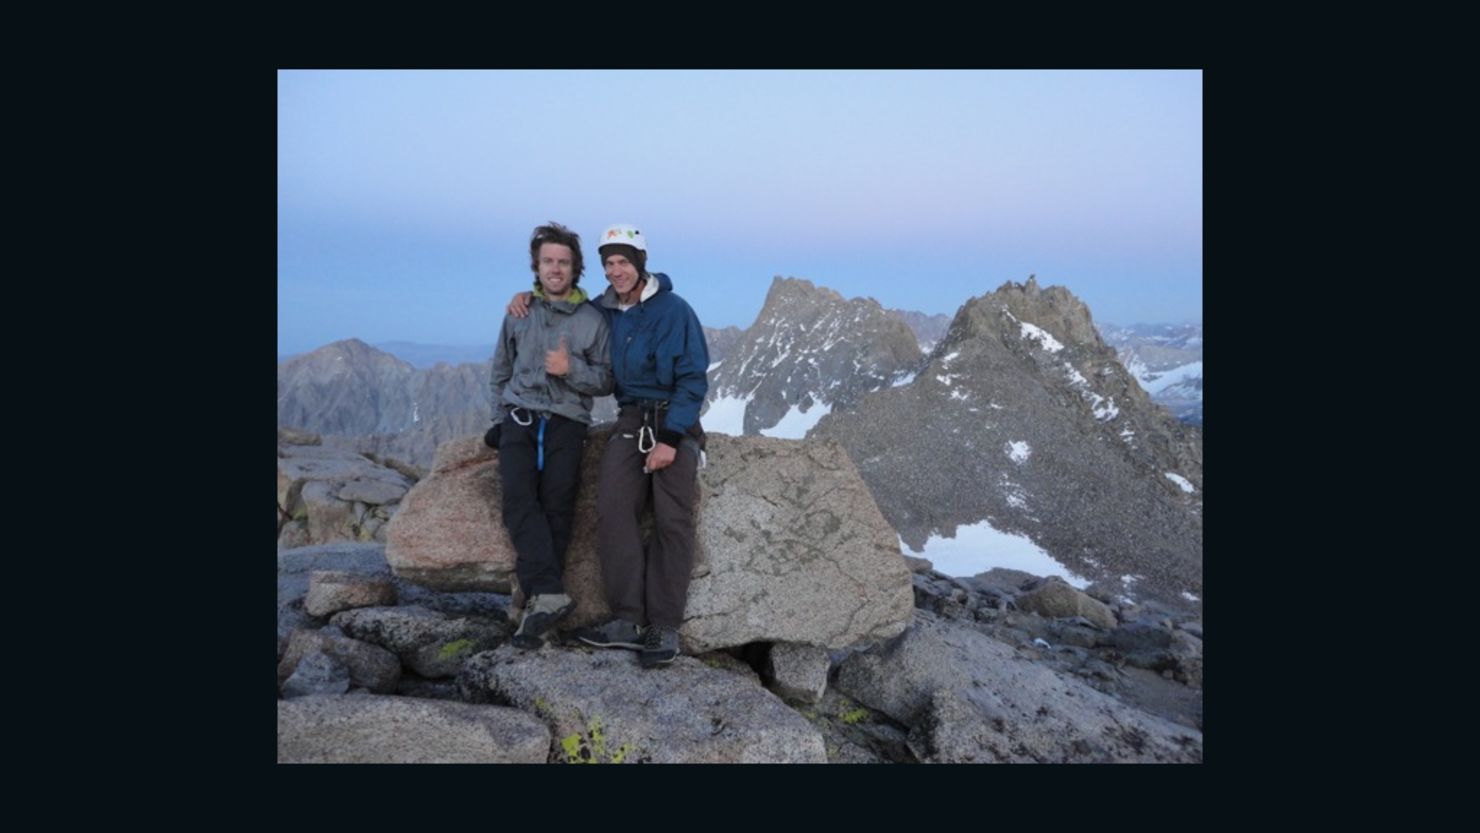 The bodies of missing hikers Gil Weiss, left, and Ben Horne were found in the mountains of Peru.